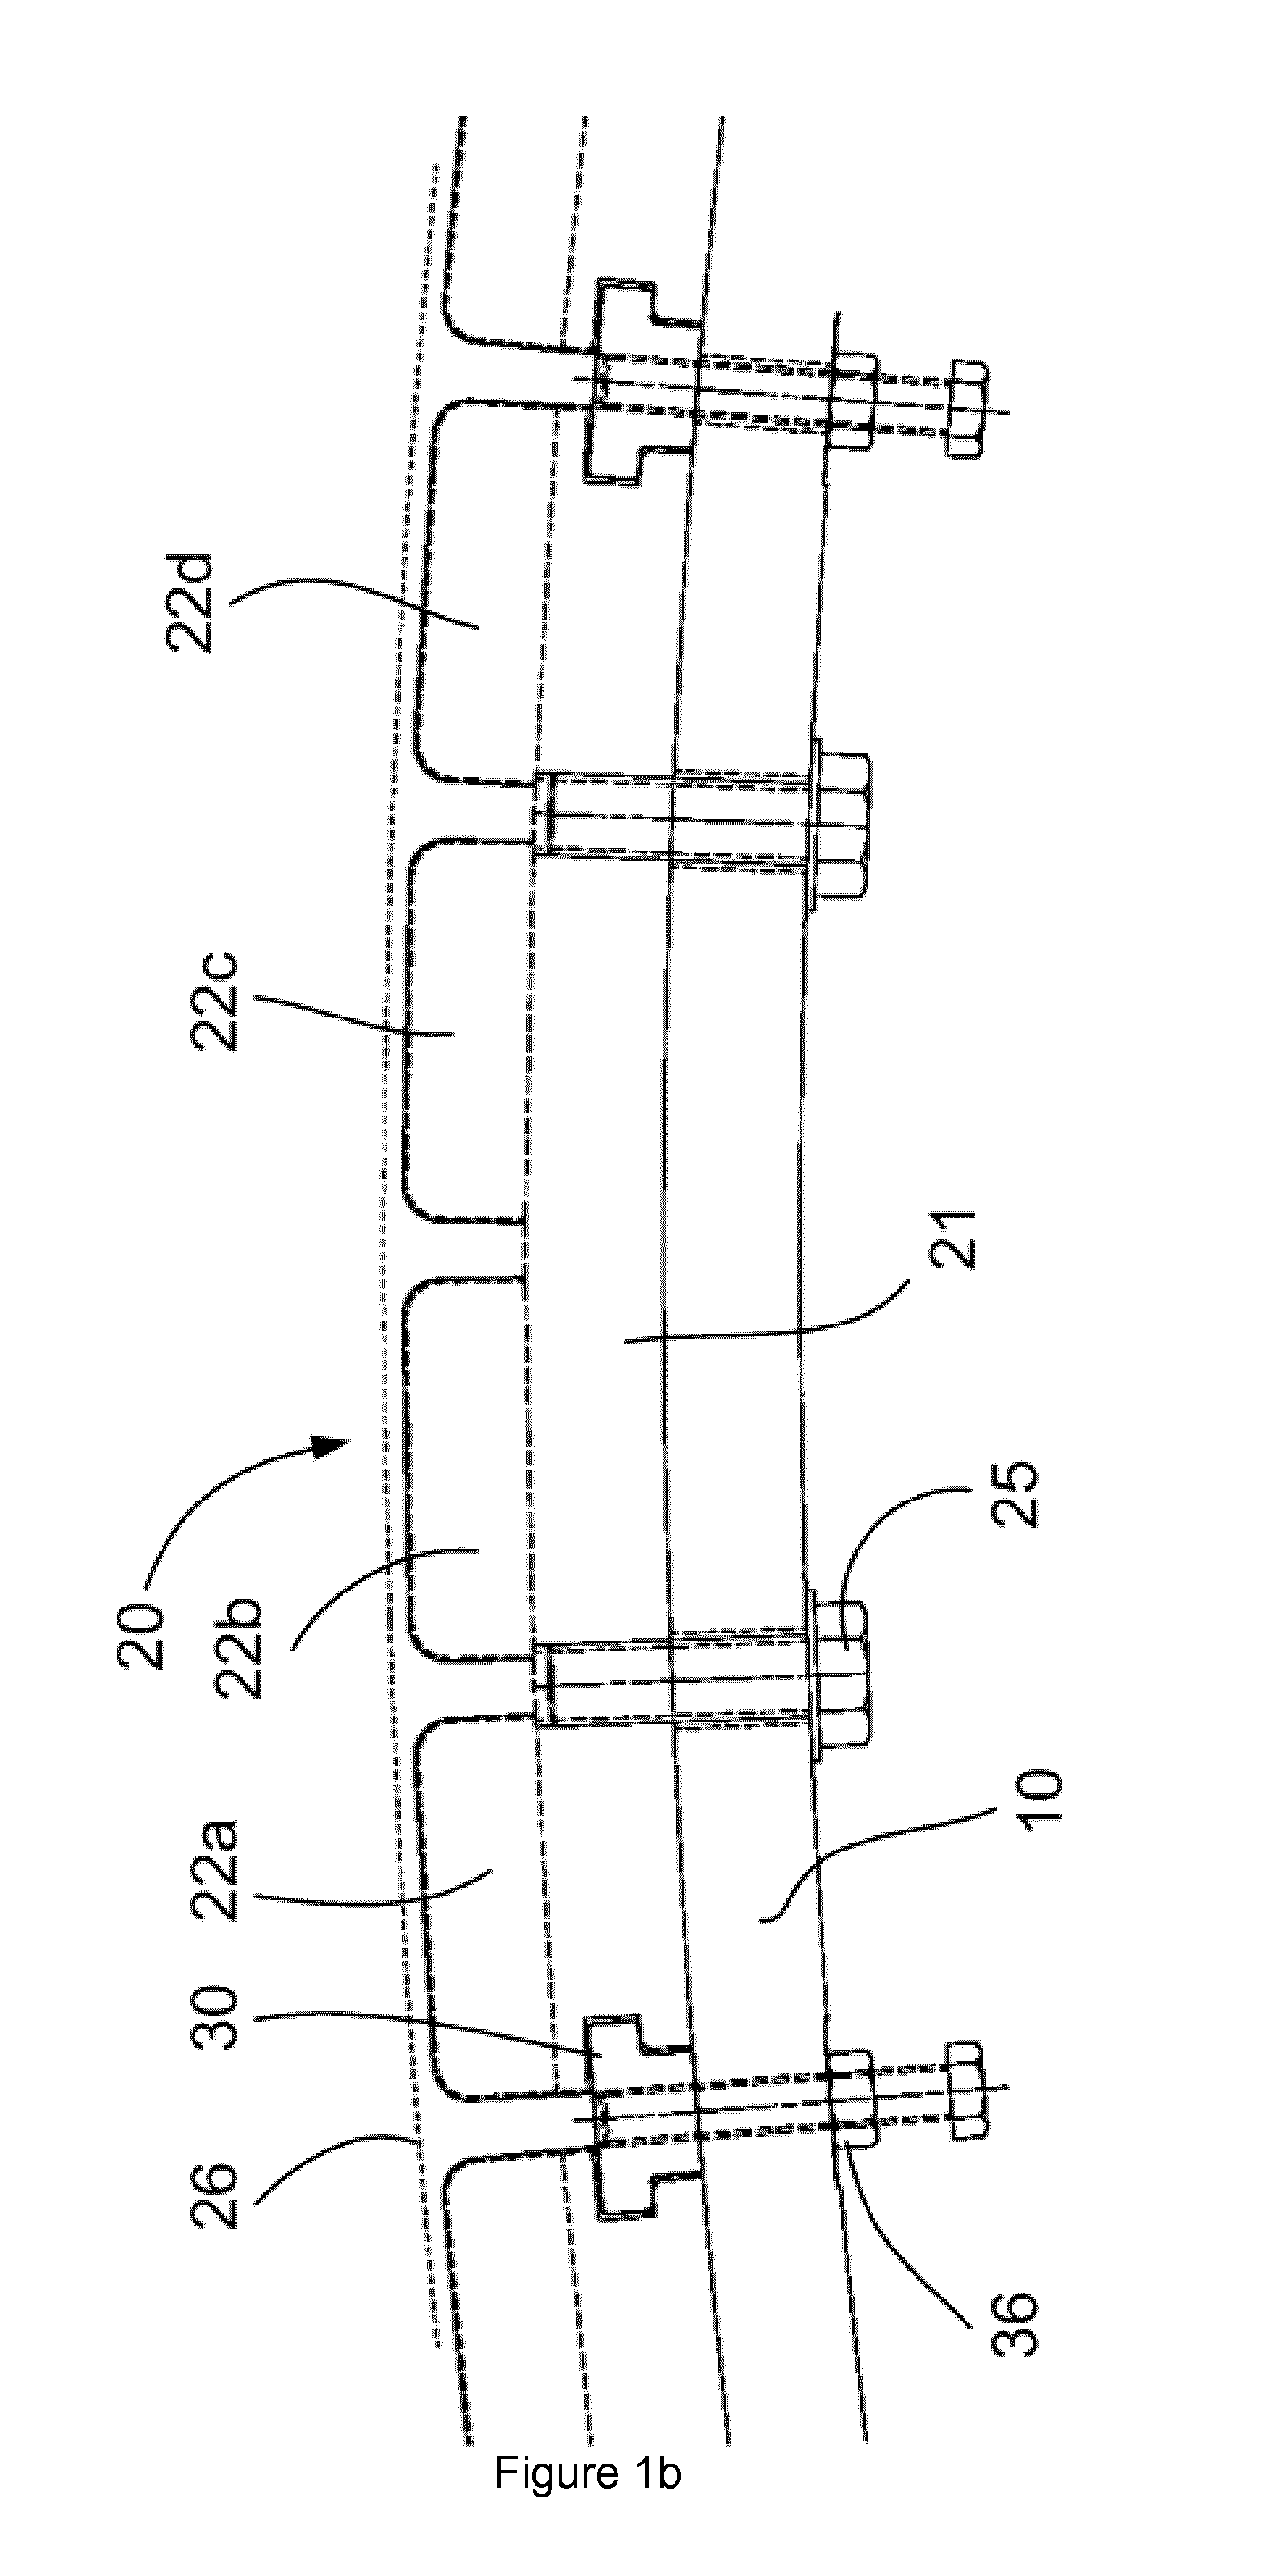 Generator rotor, assembly method and related insertion tool